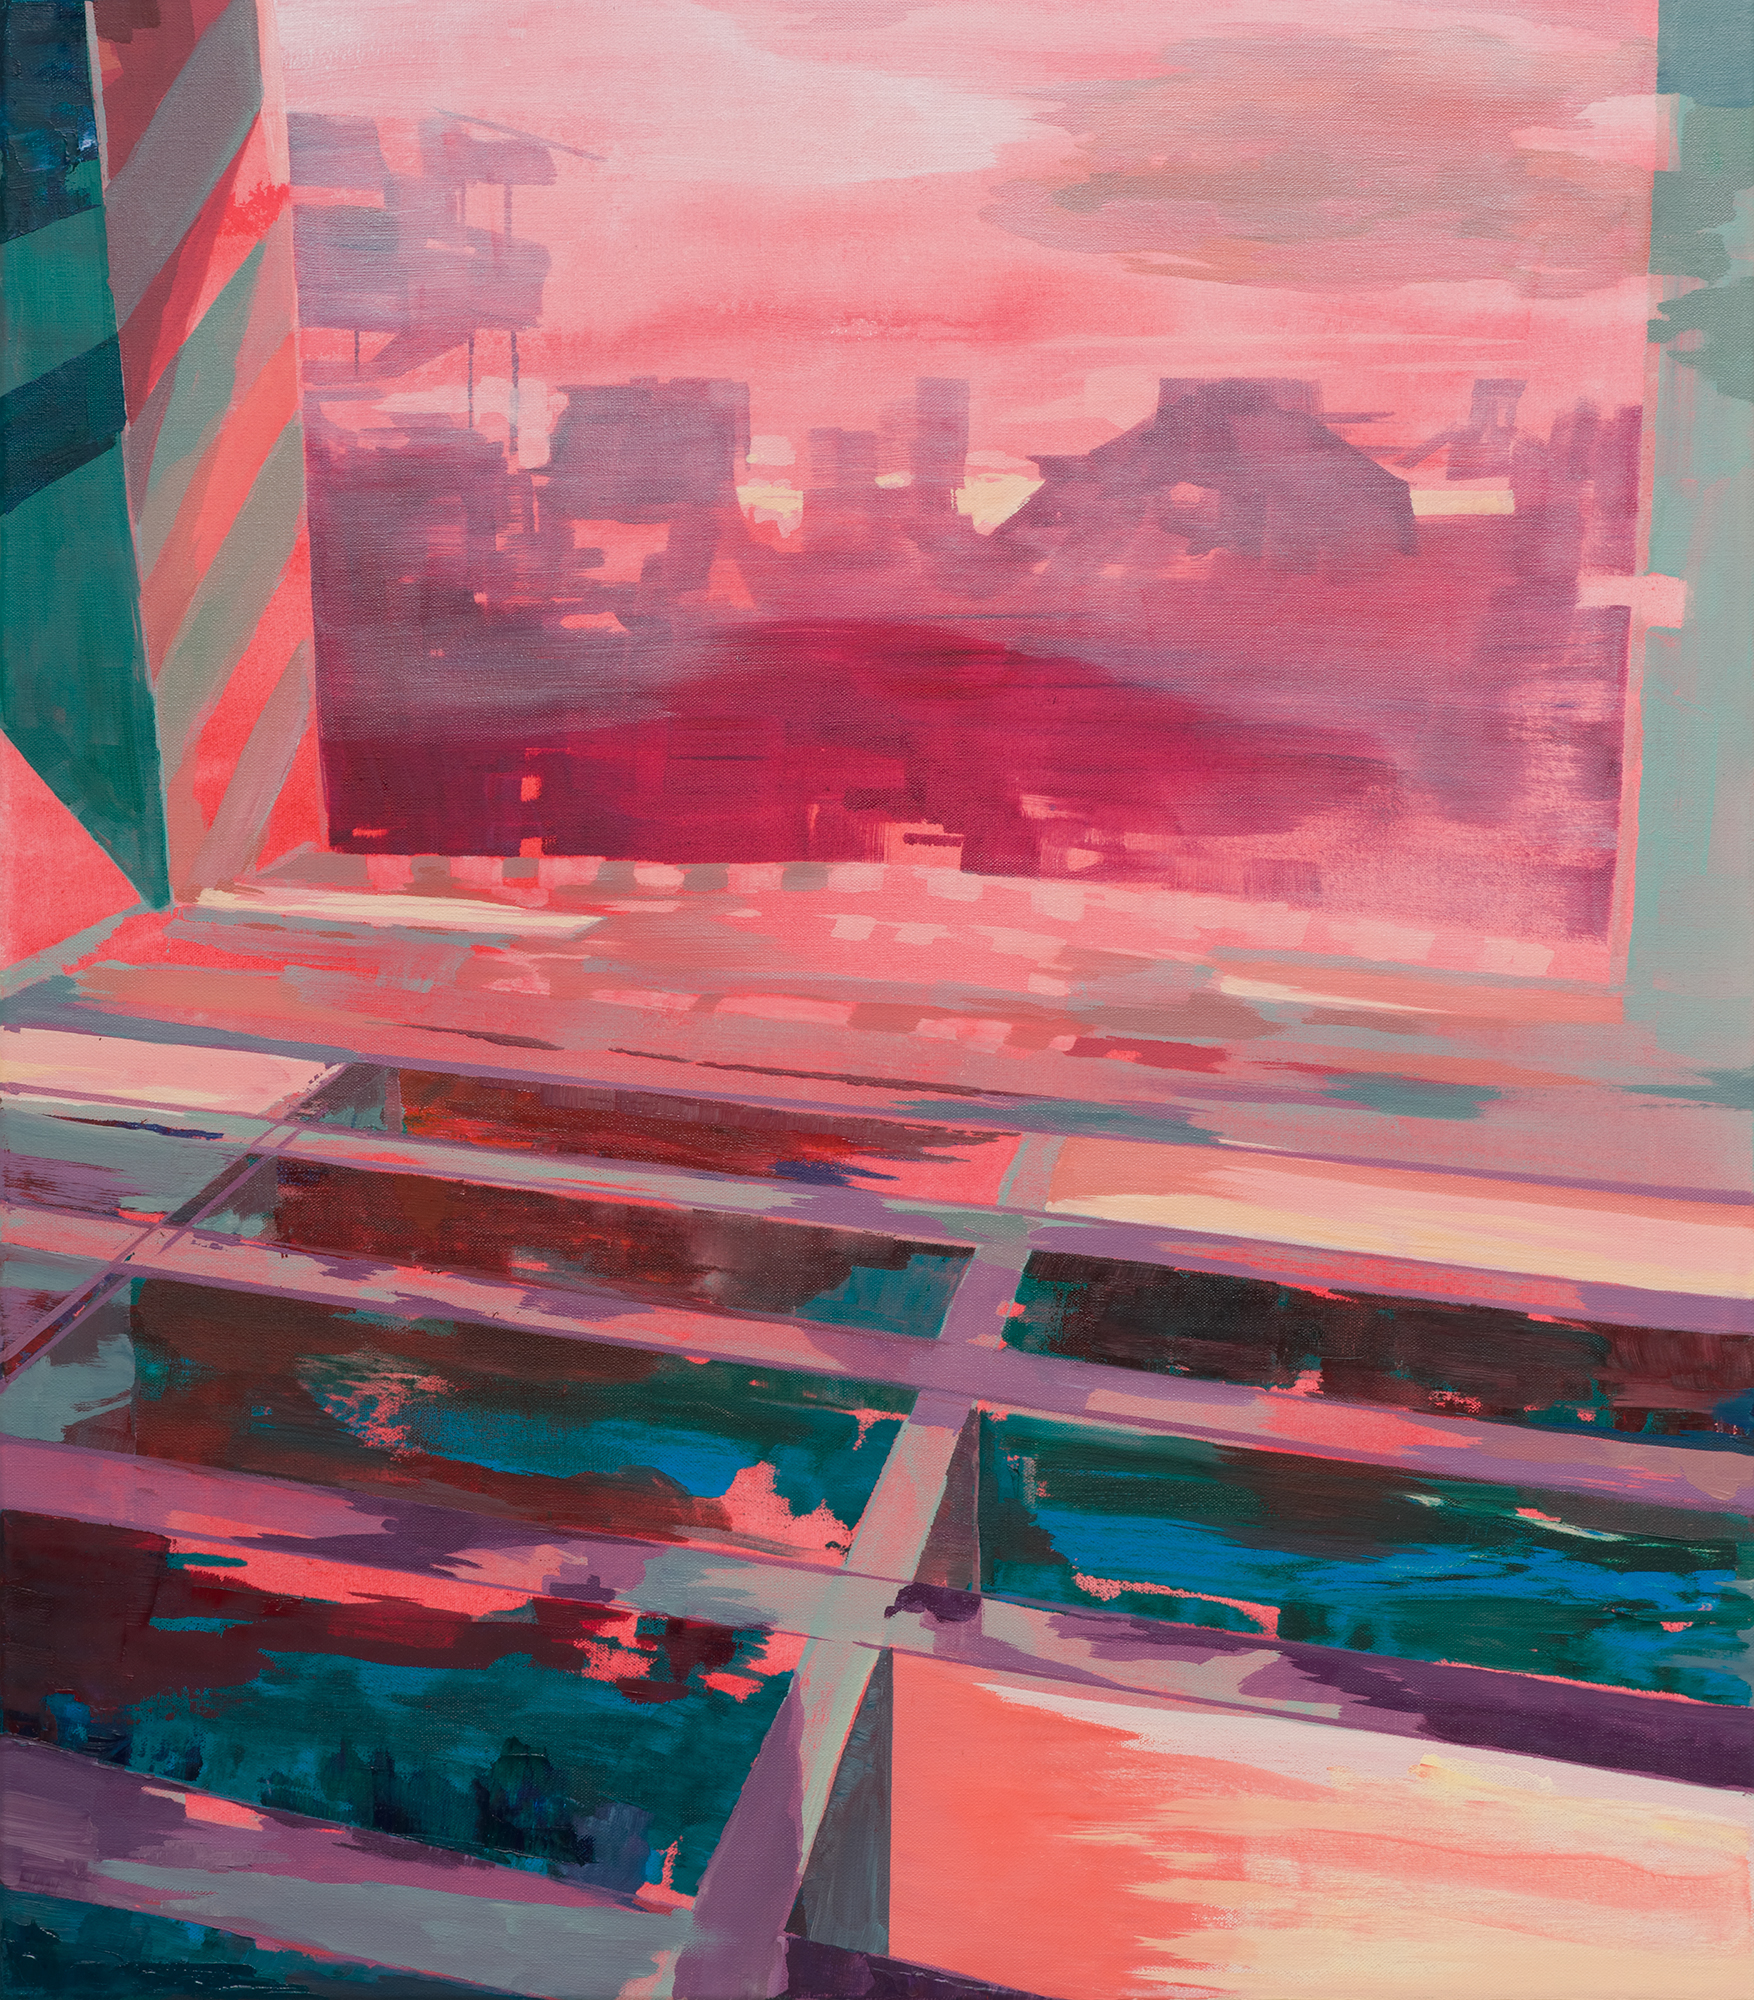 Chamber, 2014, 81 x 70 cm, oil on canvas